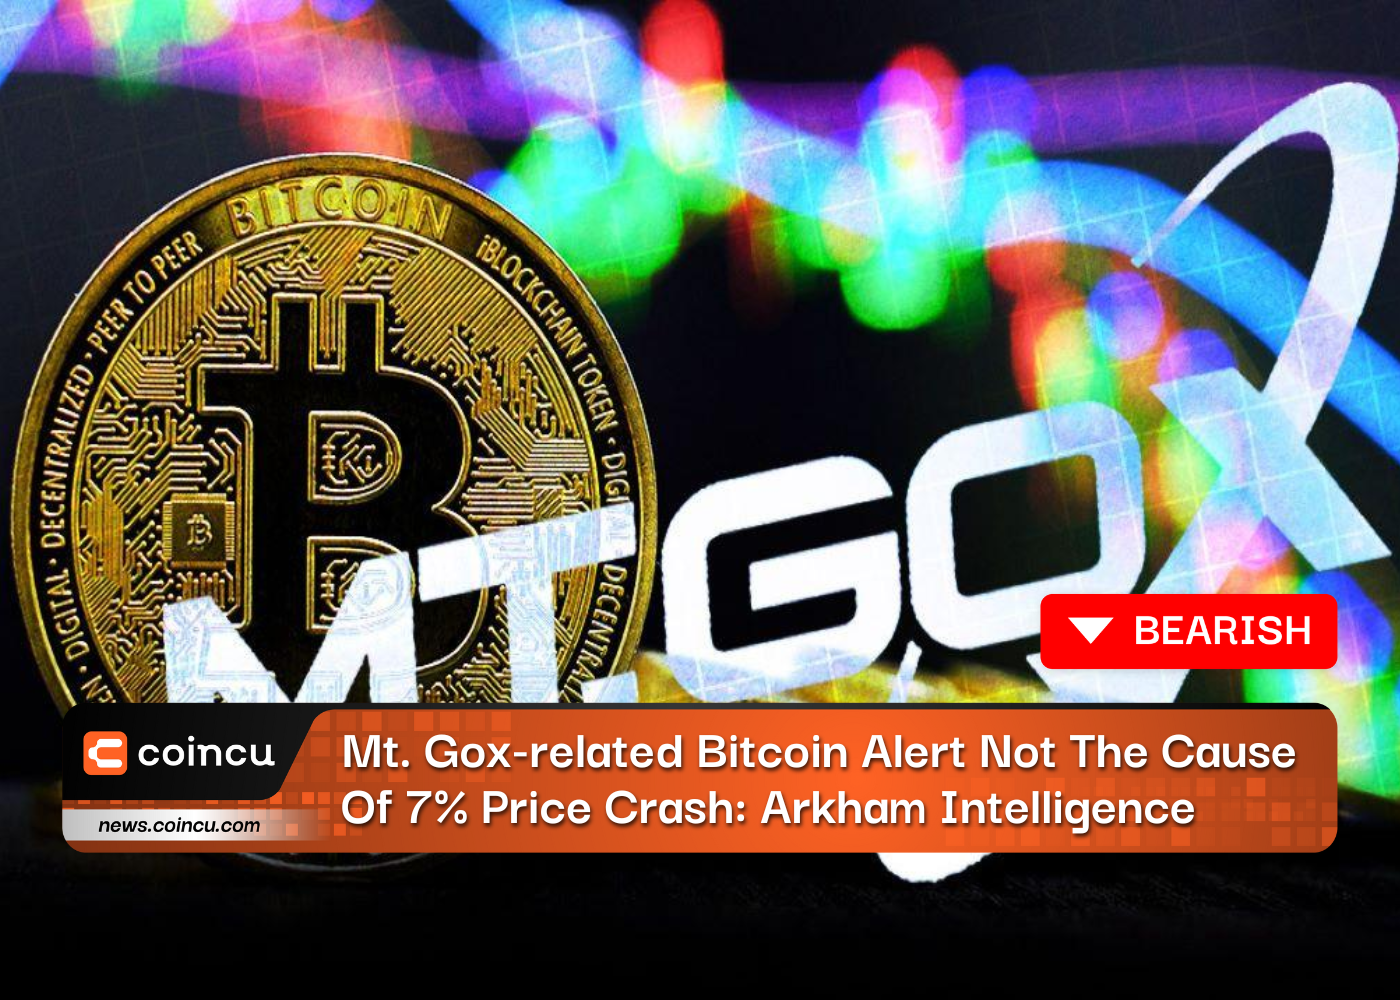 Mt. Gox-related Bitcoin Alert Not The Cause Of 7% Price Crash: Arkham Intelligence